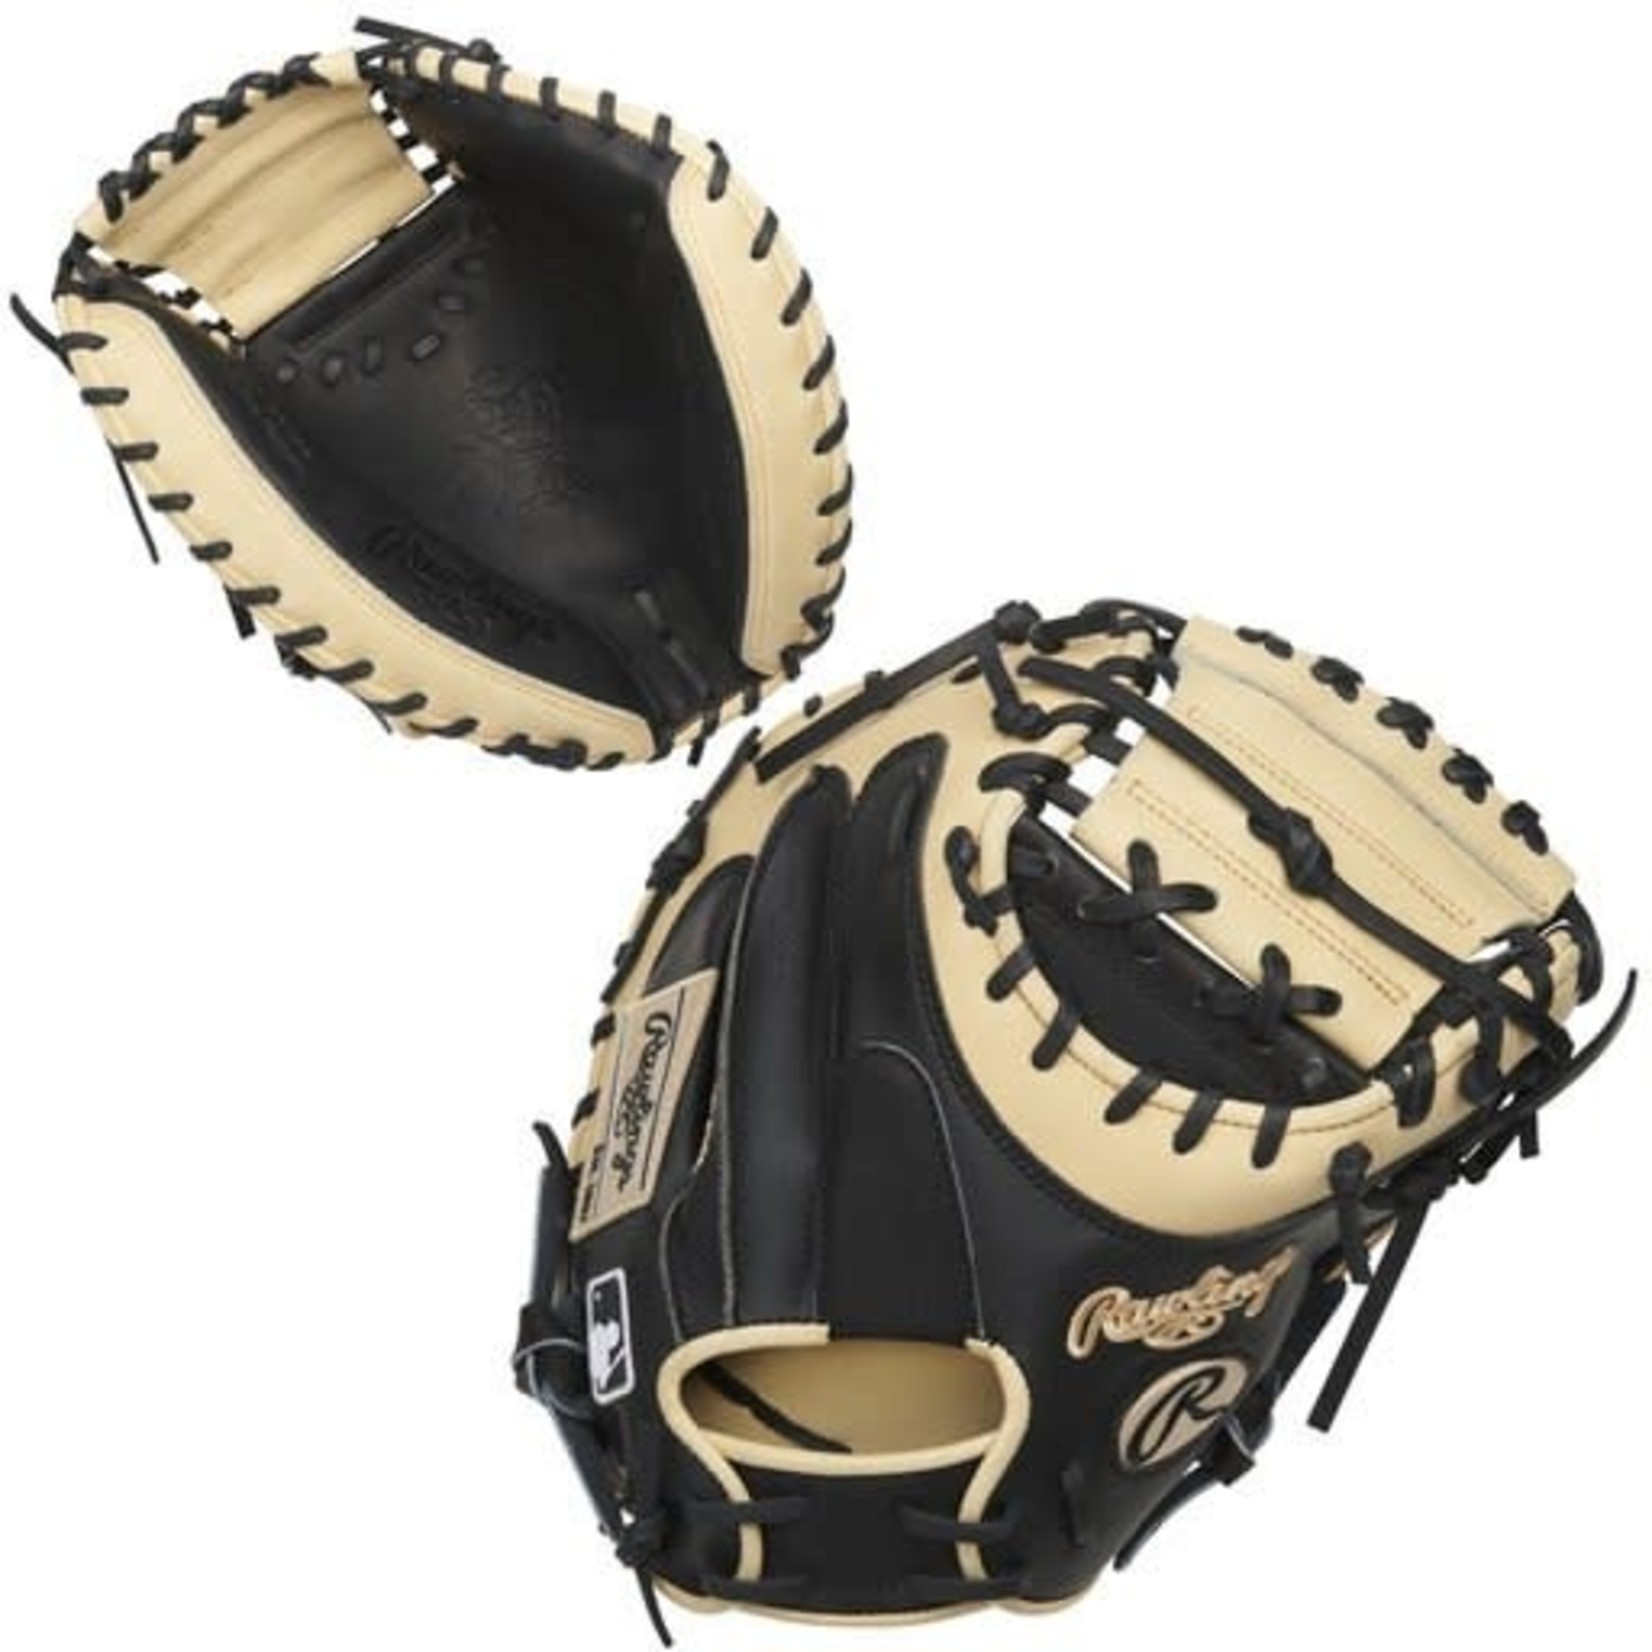 Rawlings Rawlings Heart of the Hide Speed Shell 34" Catcher's Mitt: PROYM4BC